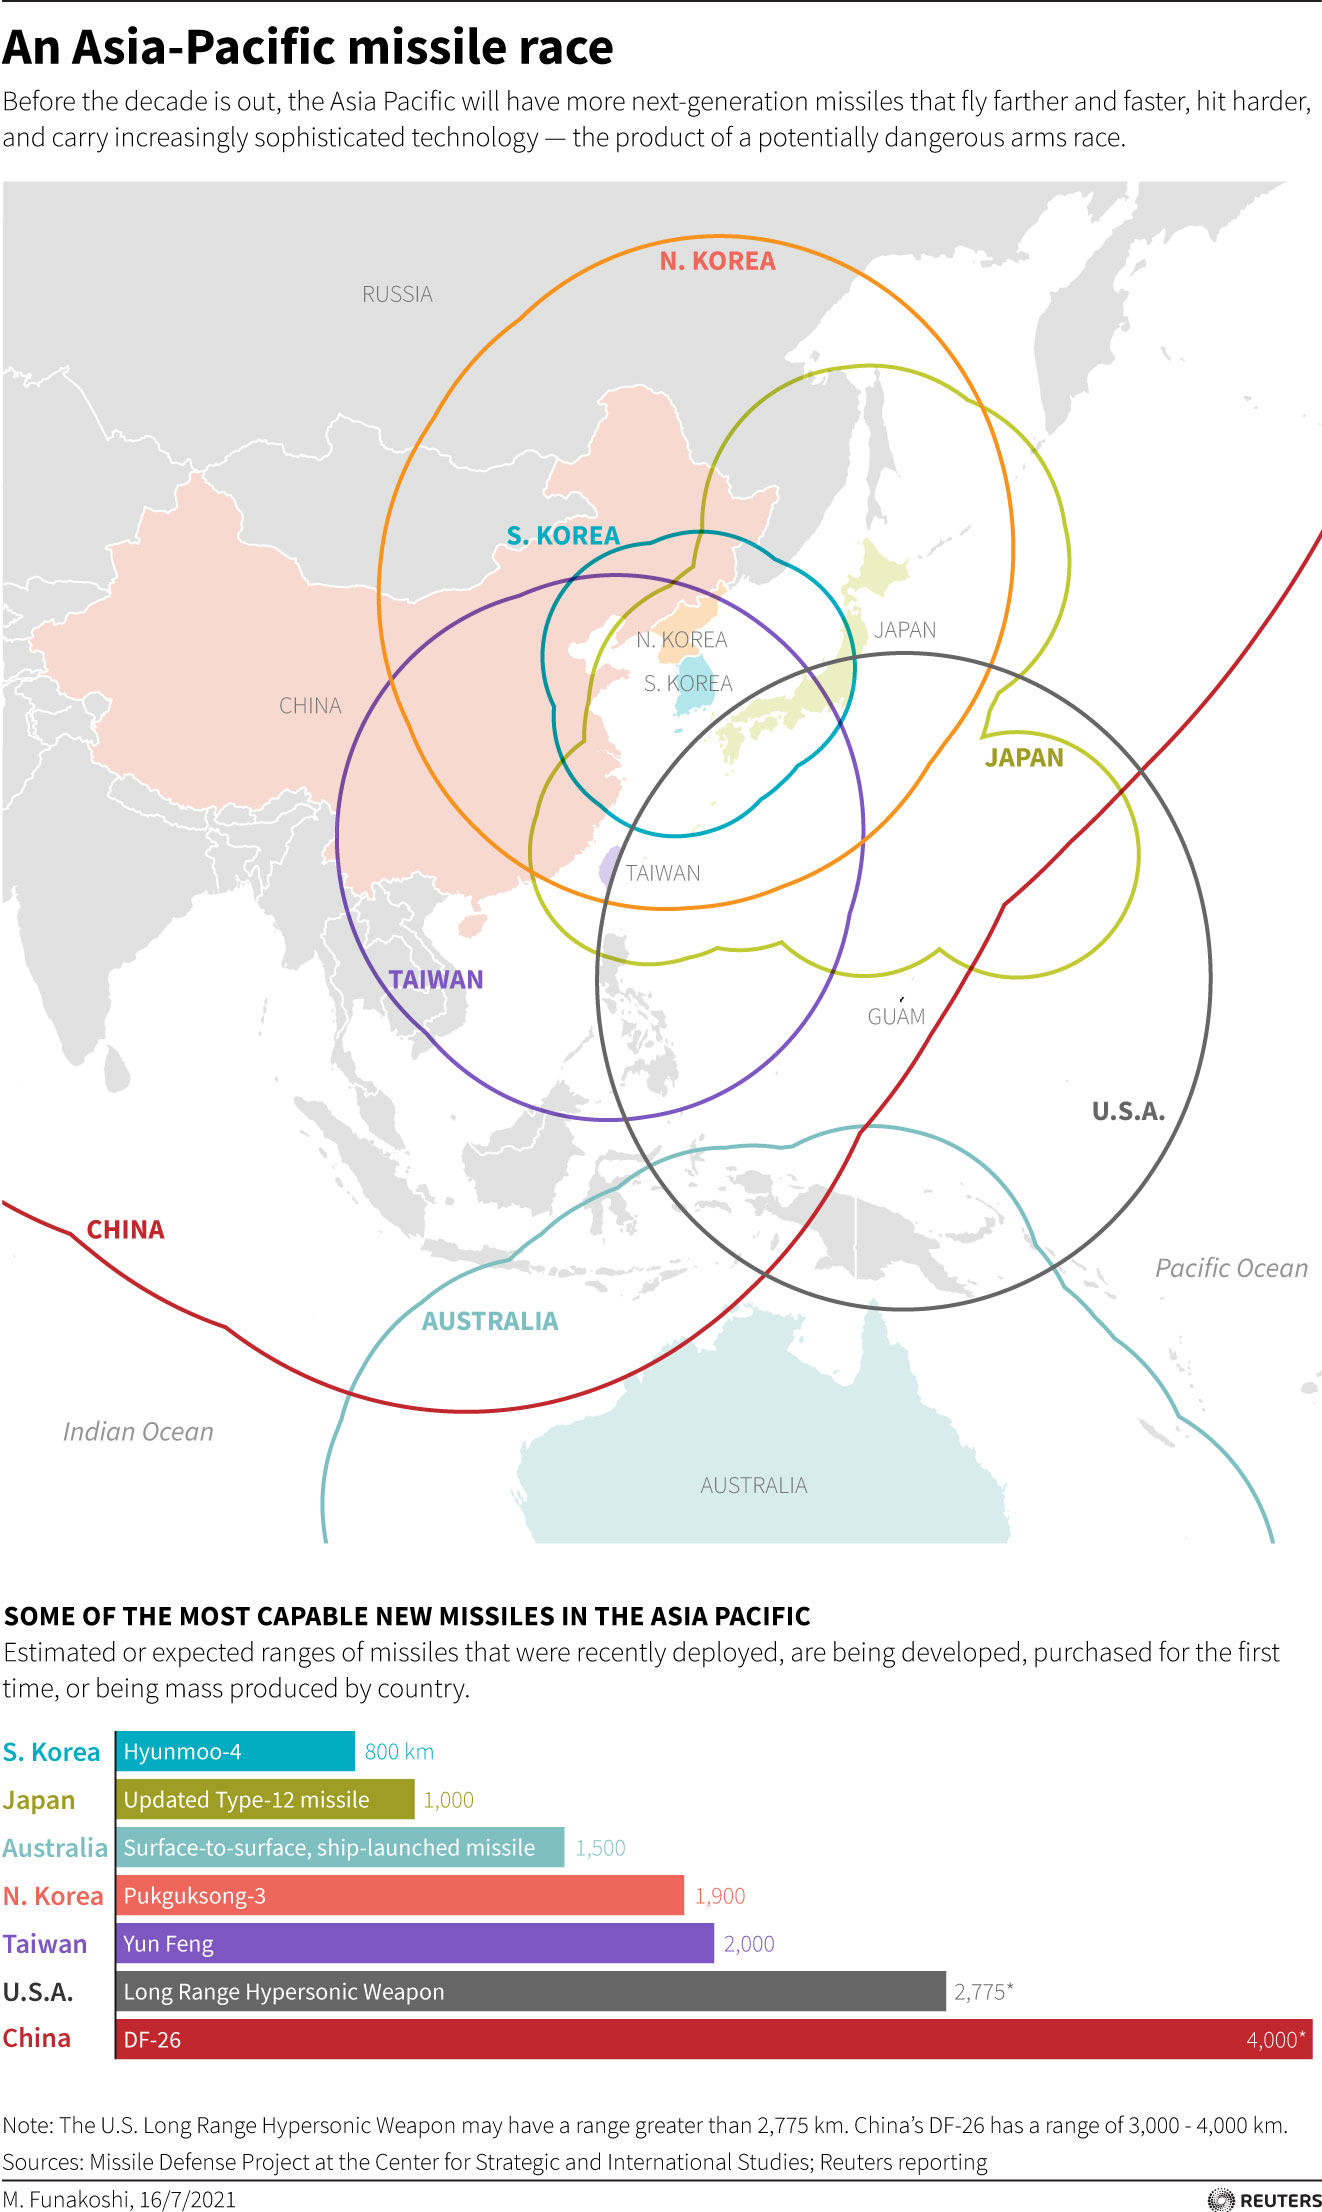 Before the decade is out, the Asia Pacific will have more next-generation missiles that fly farther and faster, hit harder, and carry increasingly sophisticated technology — the product of a potentially dangerous arms race.